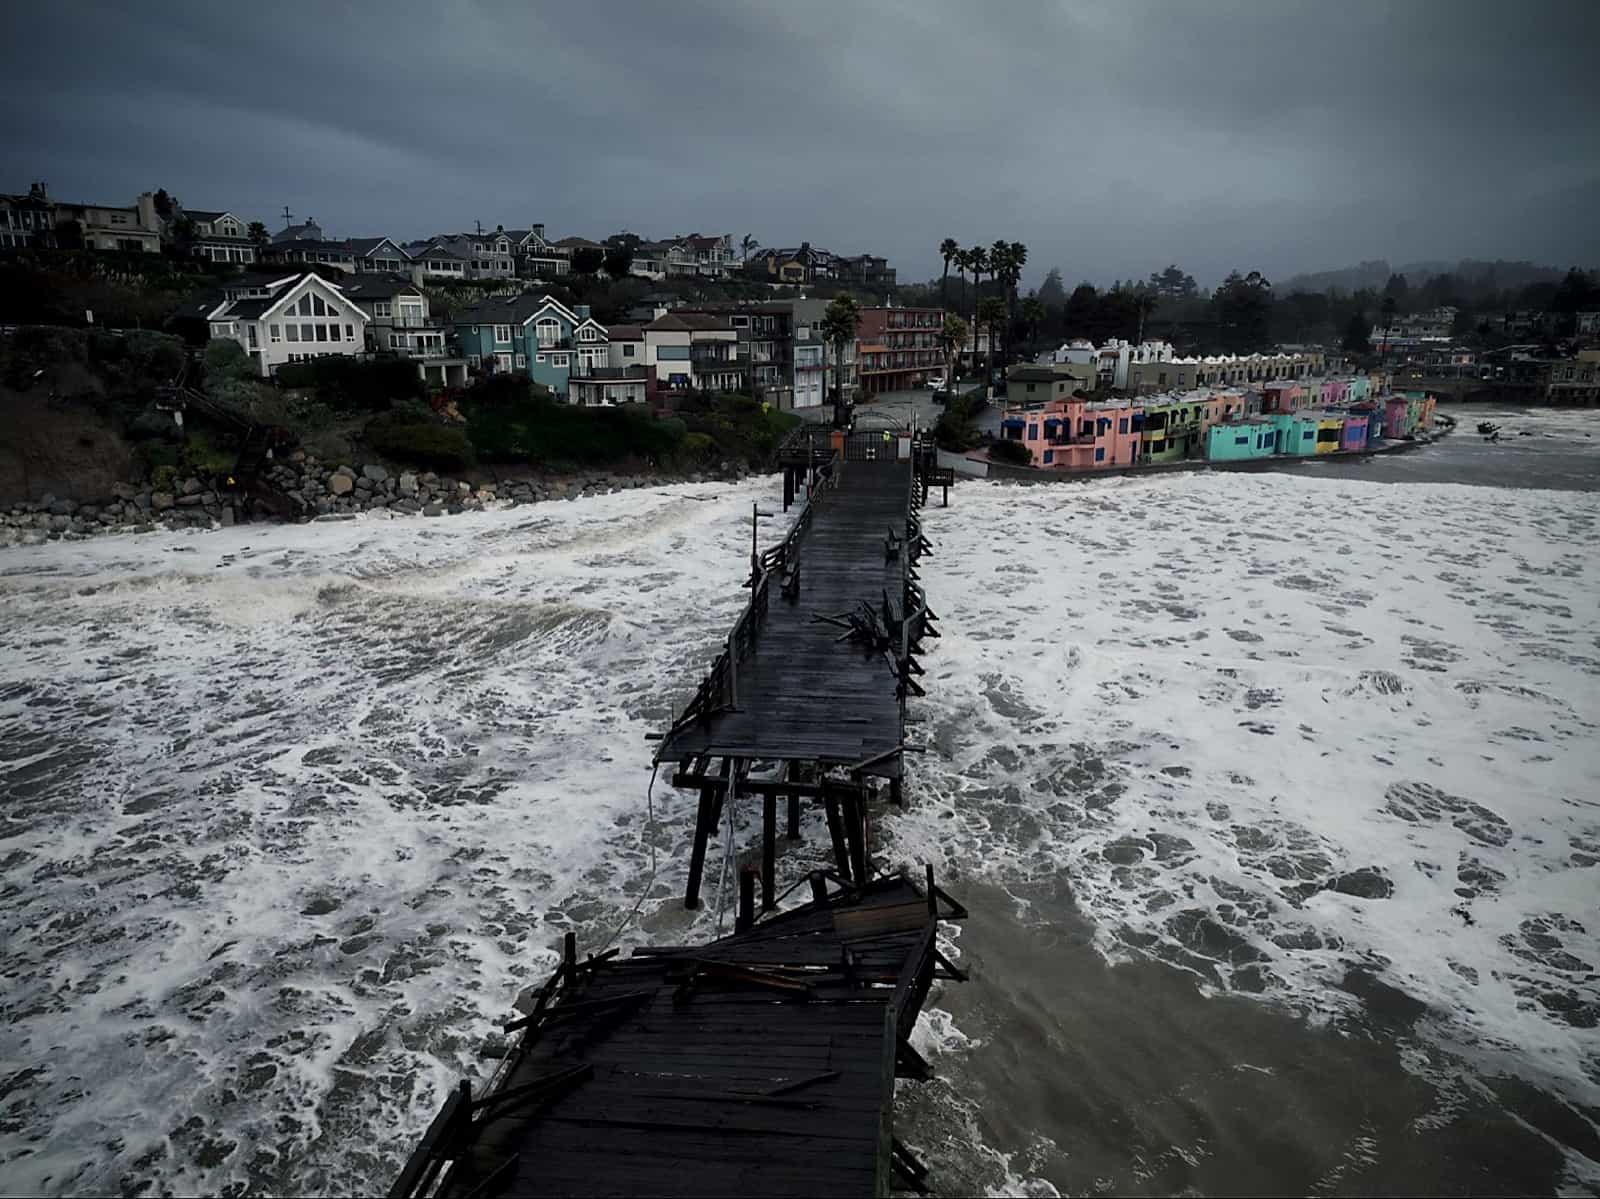 A section of the Santa Cruz boardwalk collapses under the raging storm tides.